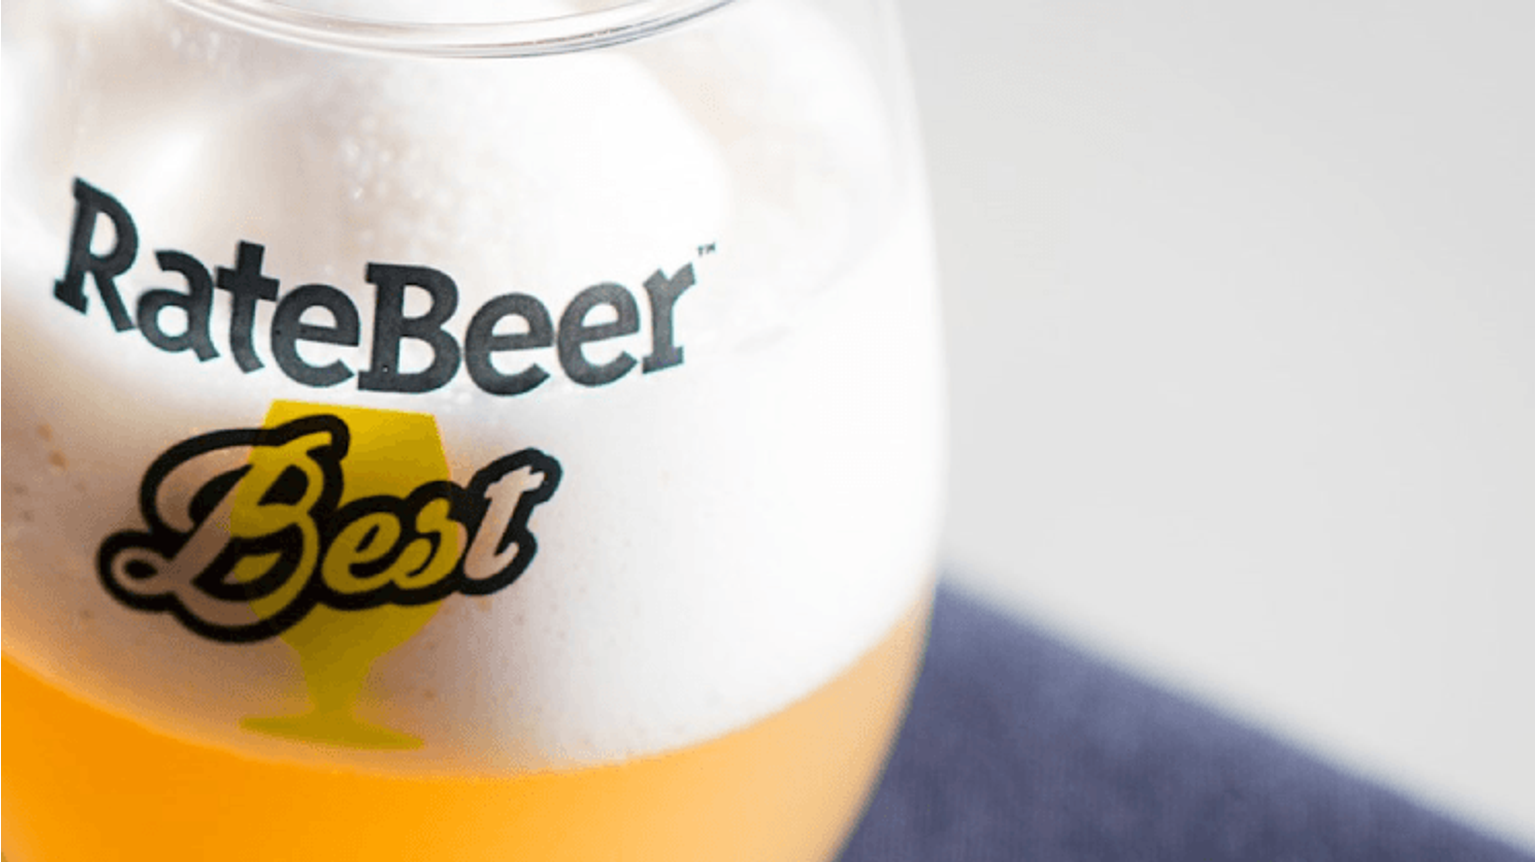 thumbnail for blog article named: Beer of the Year - The RateBeer Best Awards